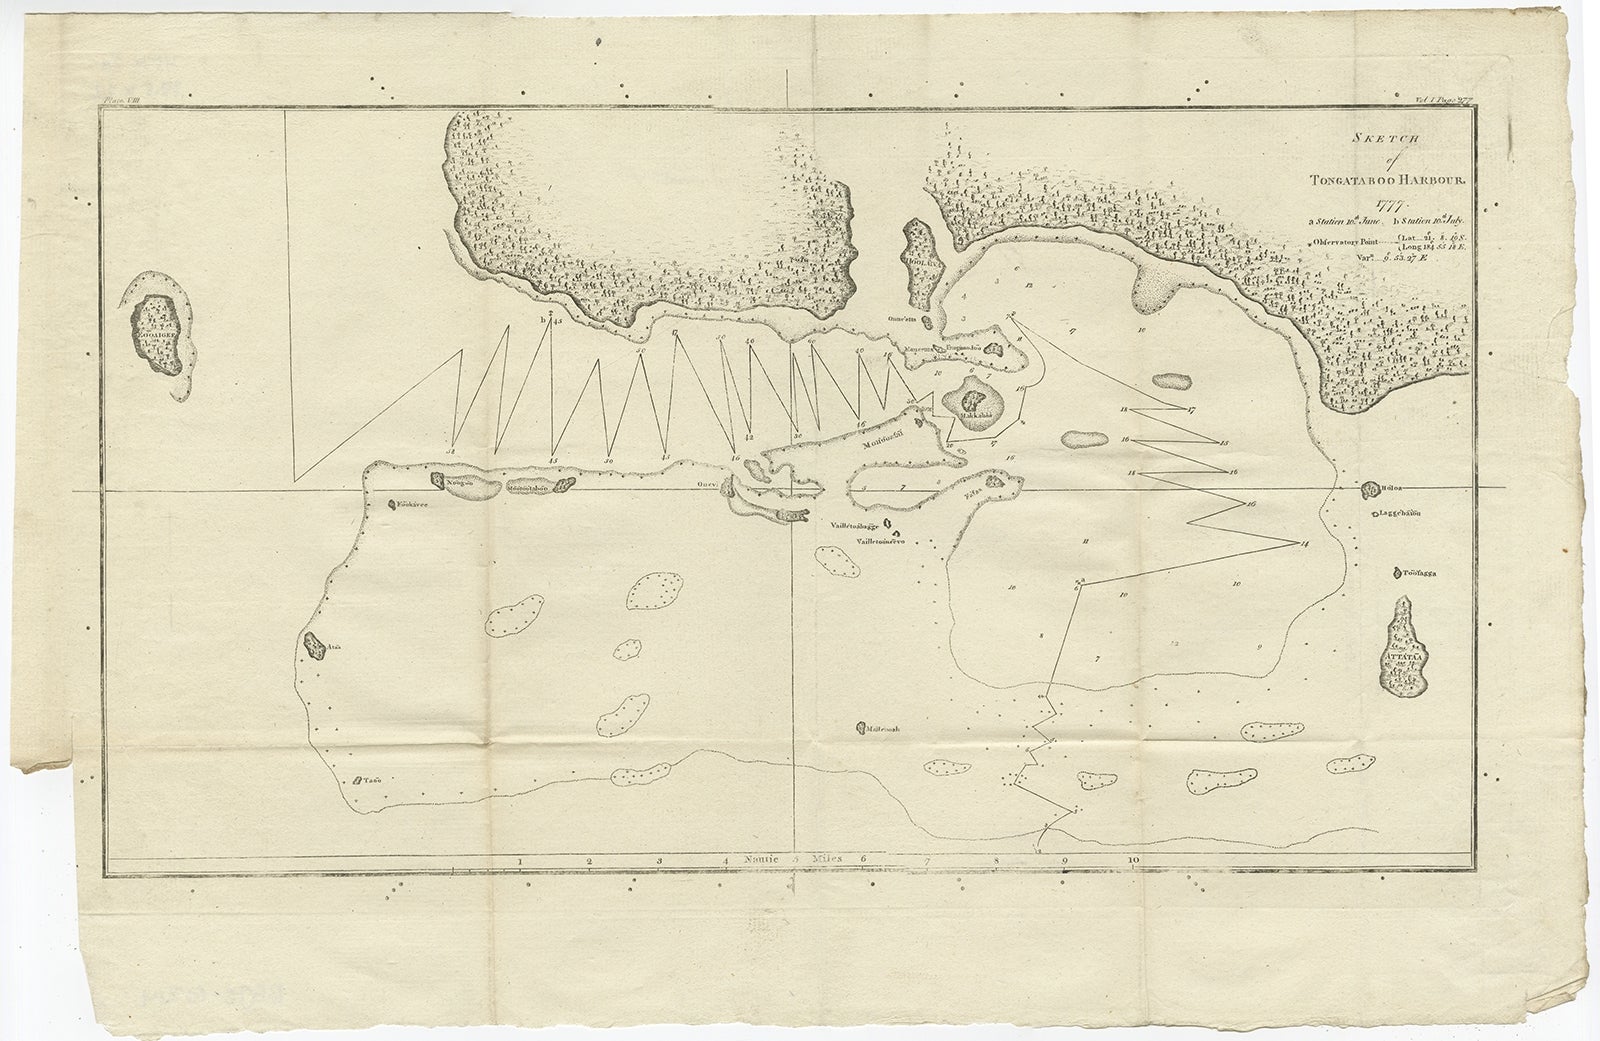 Antique map titled 'Sketch of Tongataboo Harbour (..)'. Antique map of the harbour of Tongatabu, one of the Tonga Islands. Originates from an edition of Cook's Voyages.

Artists and Engravers: Published by Nicol, G. and Cadell,